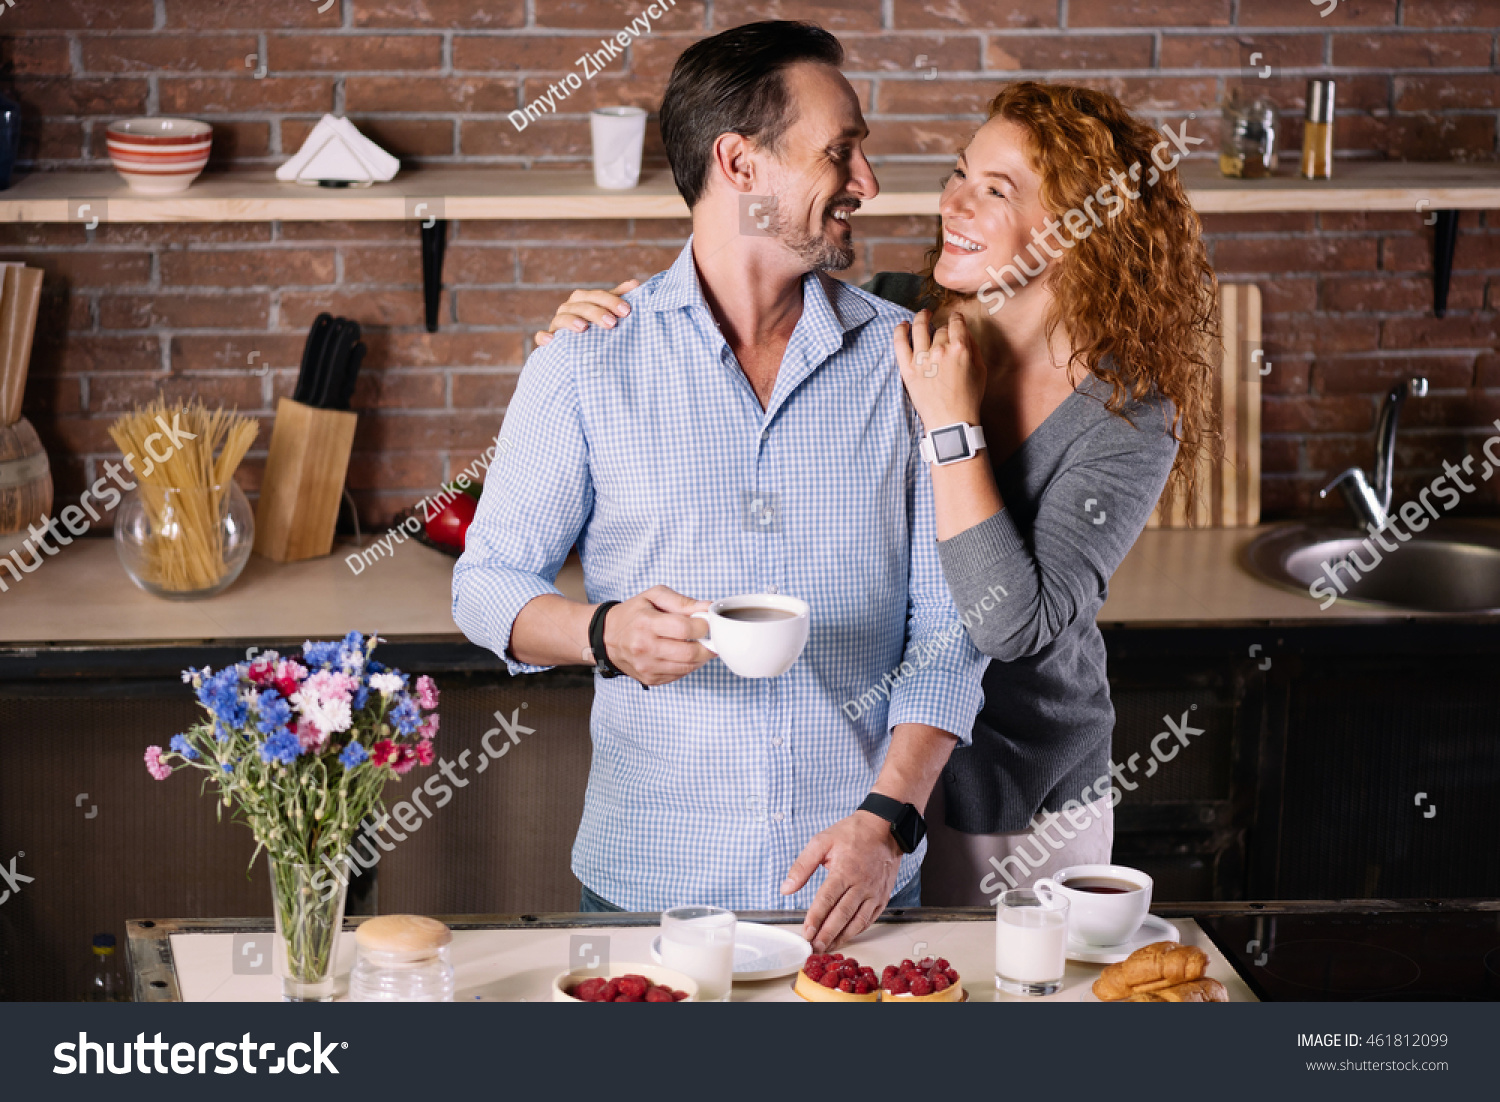 Woman embracing man in the kitchen #461812099